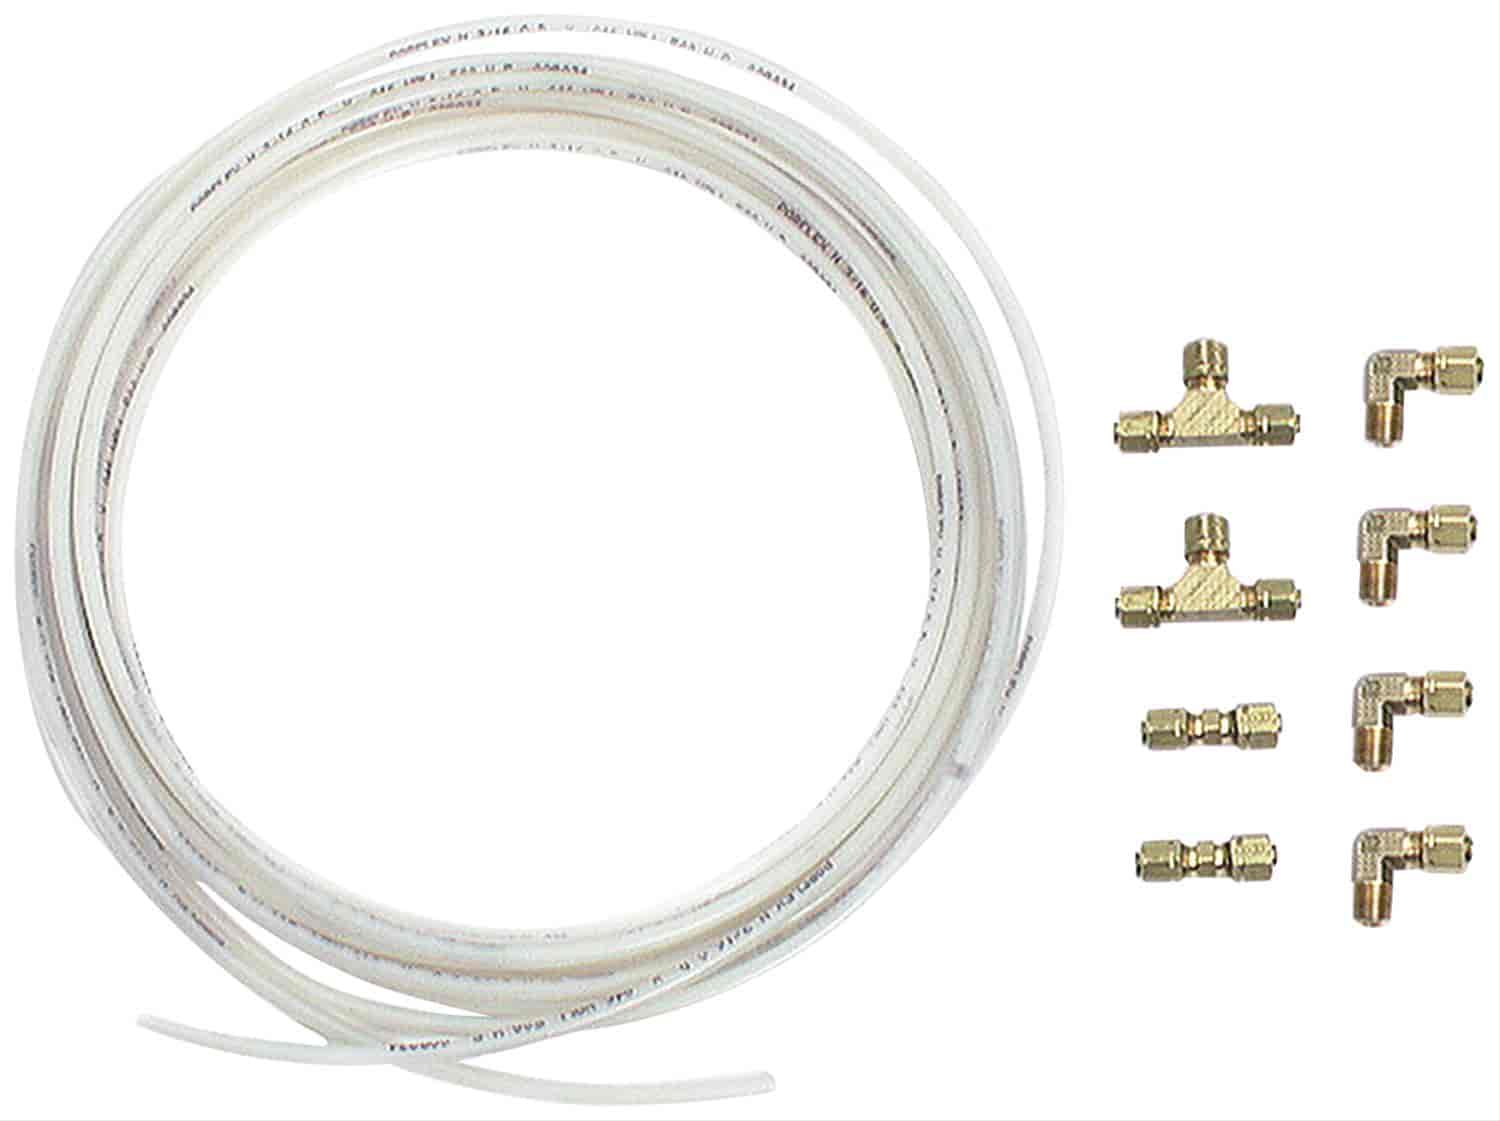 Nylon Brake Line Kit Includes 35ft Line and Fittings